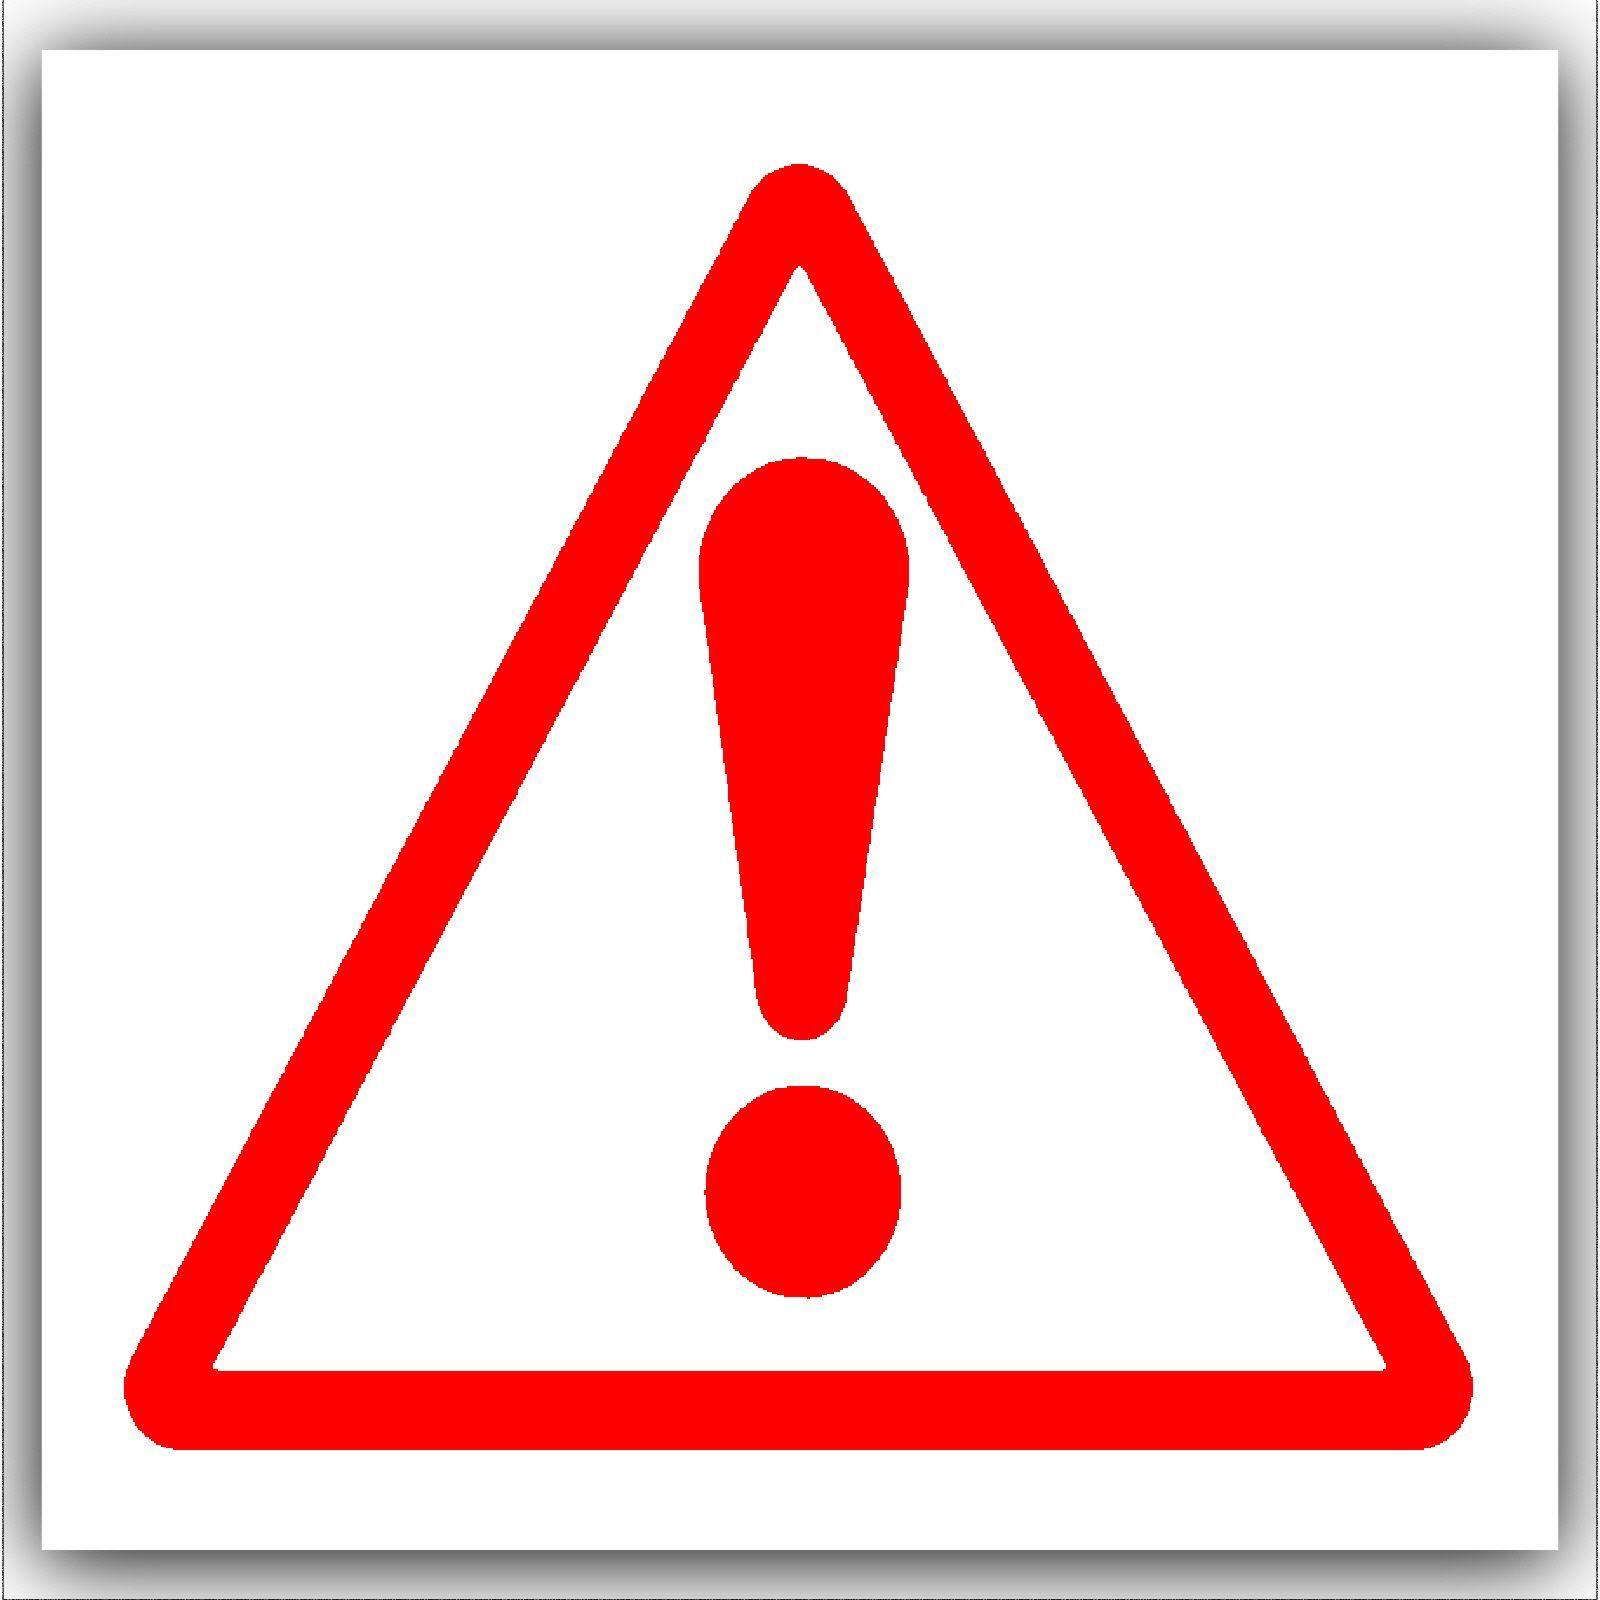 Whiye and Red a Logo - 1 x Caution Warning Danger Symbol-Red on White External Self ...